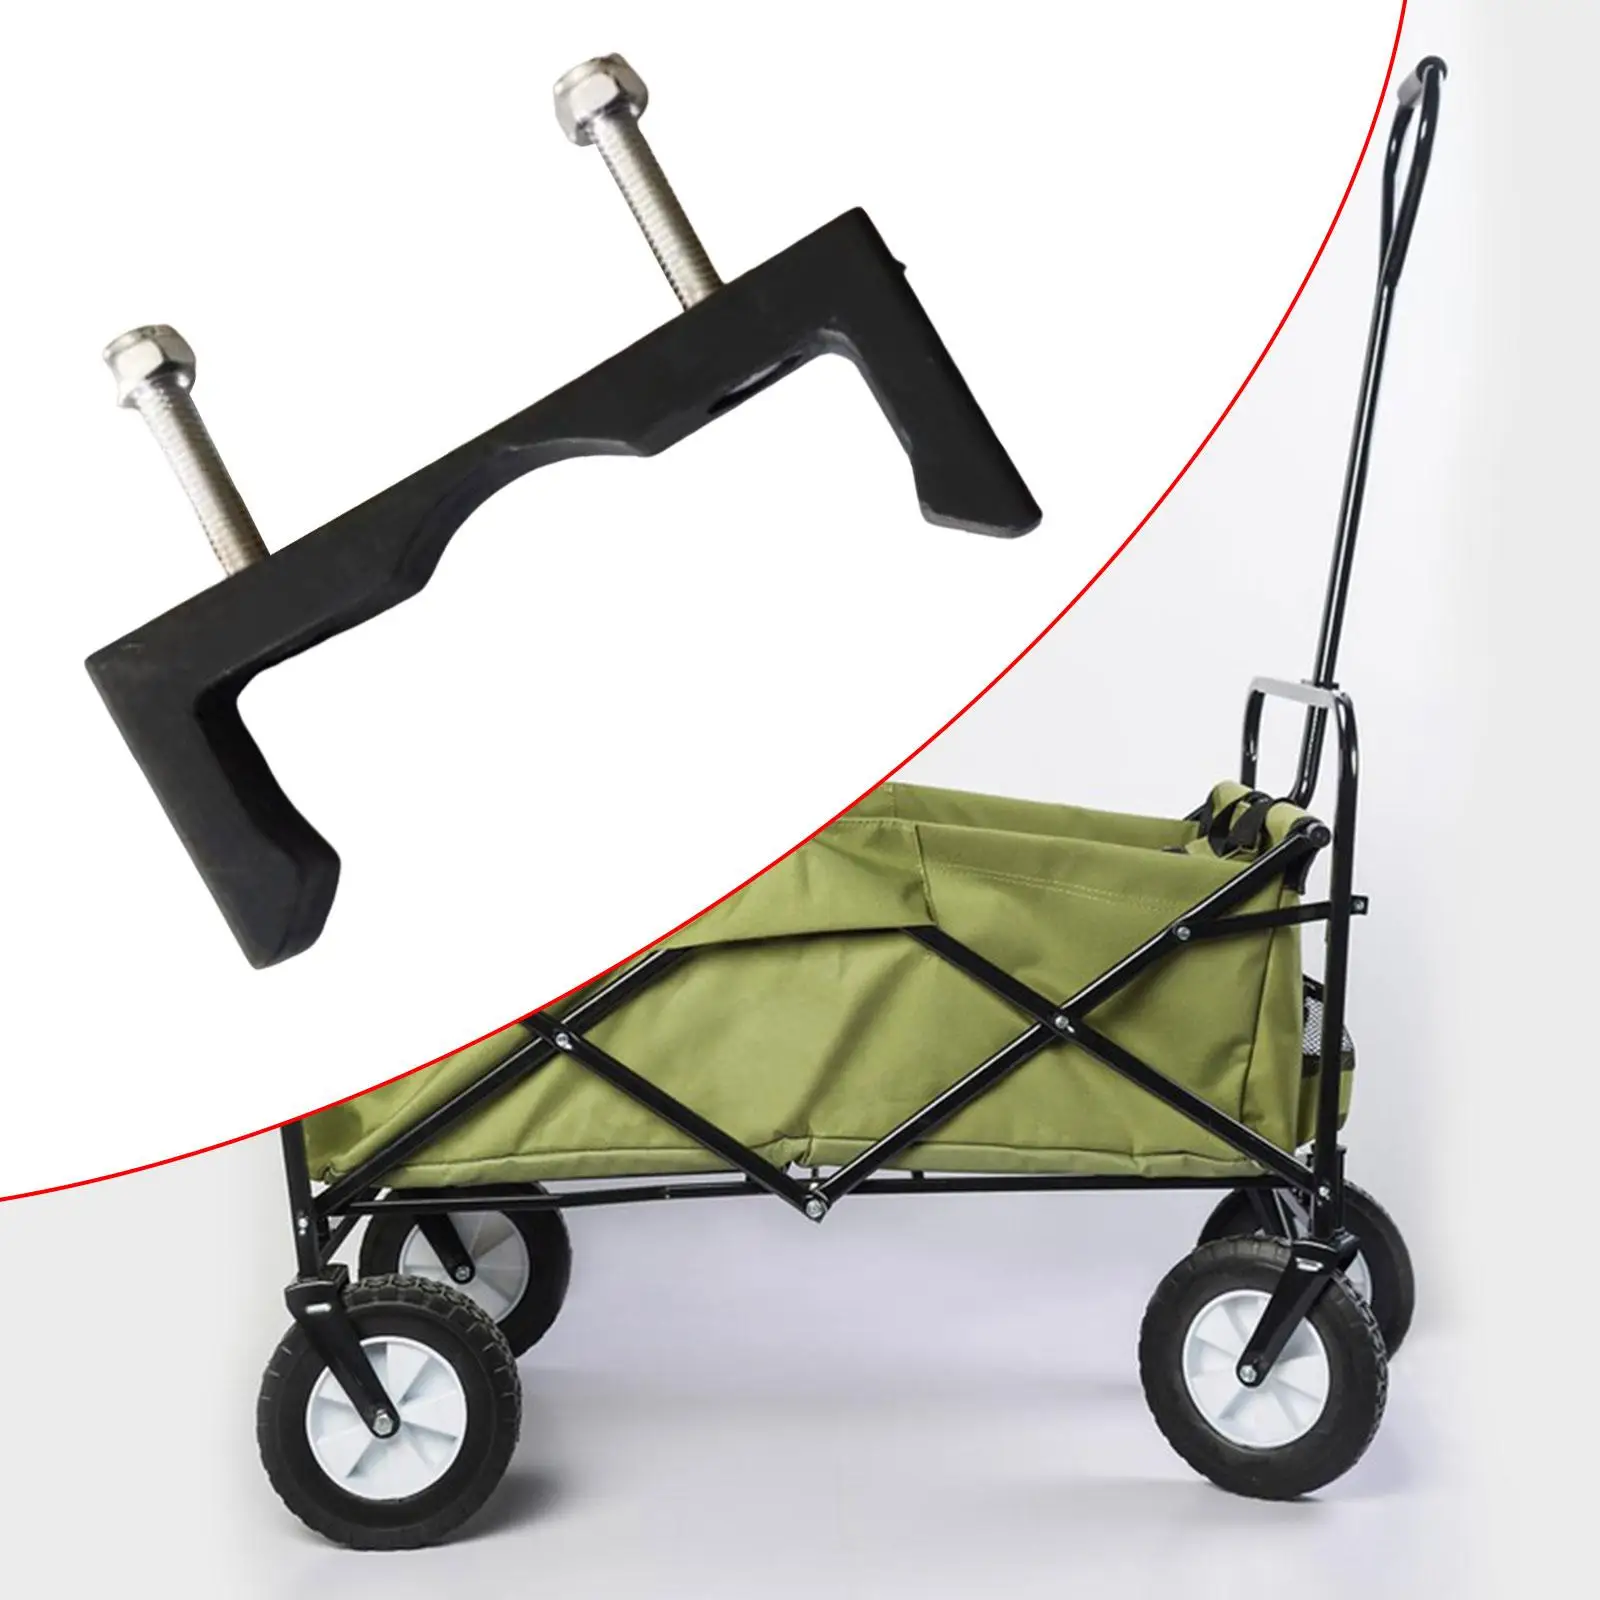 Utility Wagon Cart Pull Push Handle Fixed Buckle Practical Compact Wagon Cart Pull Push Handle Fixed Buckle for Shopping Camping